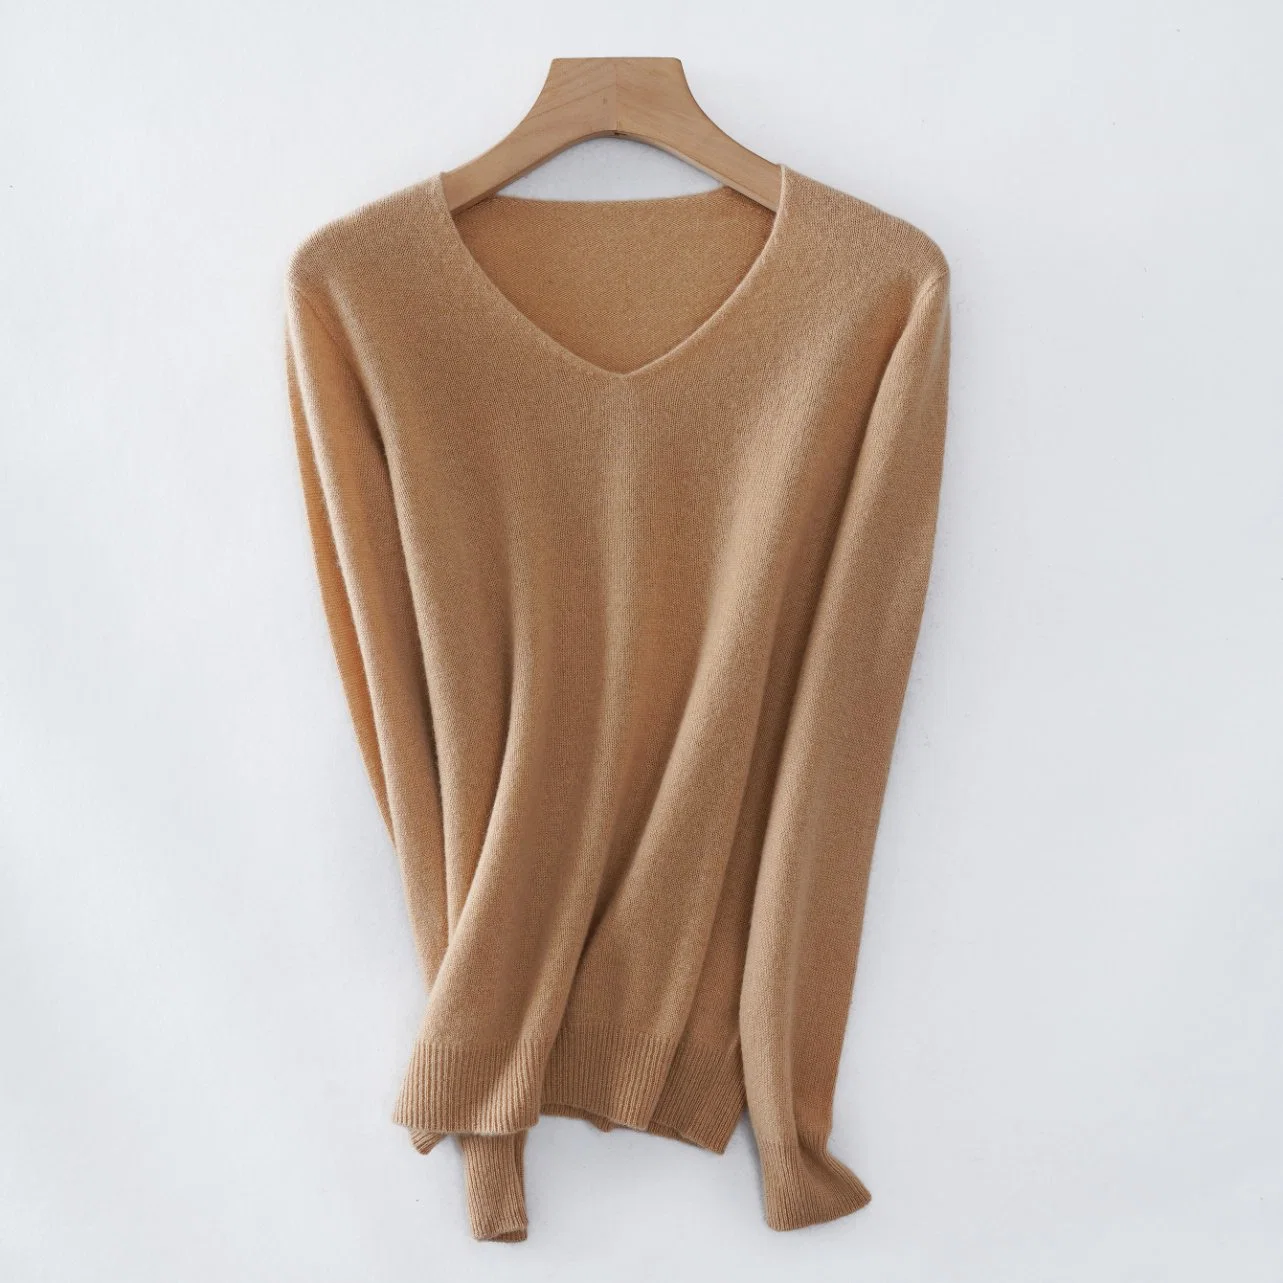 Wholesale Ladies Classic All Season Seamless Lightweight V-Neck Knitted Pullover Cashmere Sweater